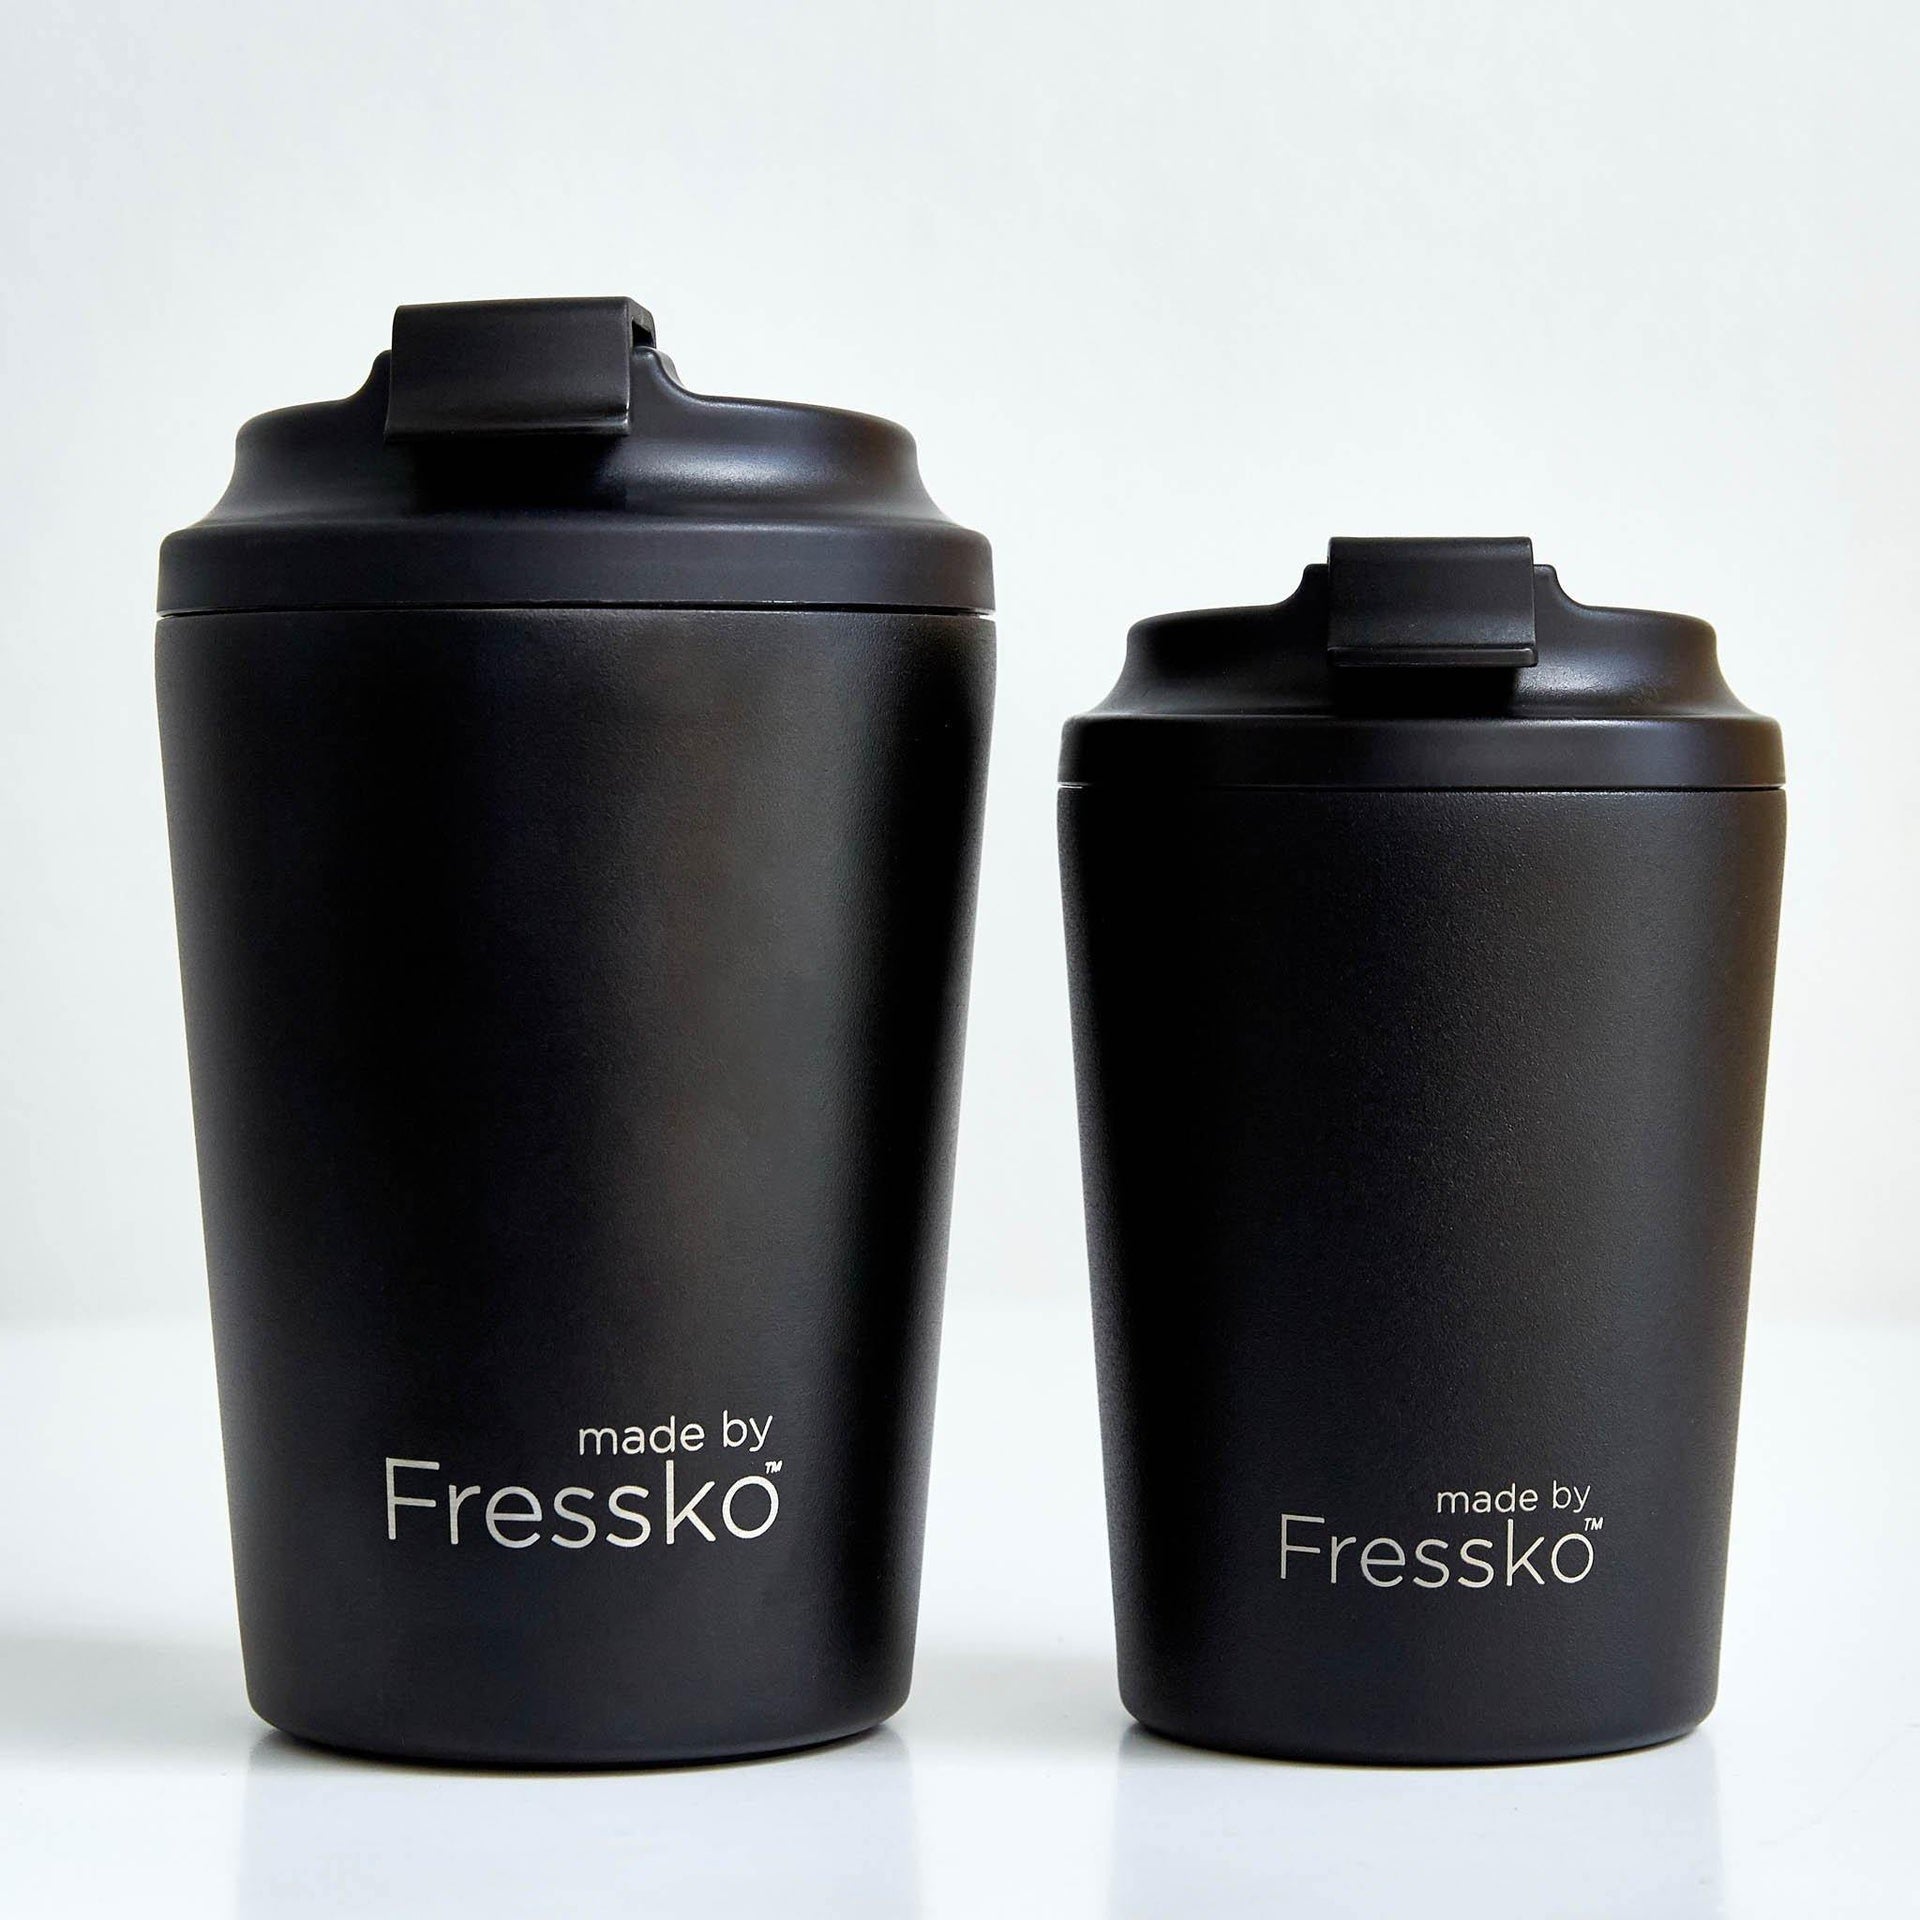 Fressko Camino Cup 12oz - Black | Re Usable Coffee Cup | reusable cup | Take away Coffee Cup | Cafe Coffee Cup | Best Reusable coffee cup | Refillable Coffee Cup | Eco Coffee Cup | Camping cups | Kids cups | Cups | Reusable tea cup | personalised coffee cup Australia | online reusable coffee cup Australia | custom coffee cups | Upcycle Studio